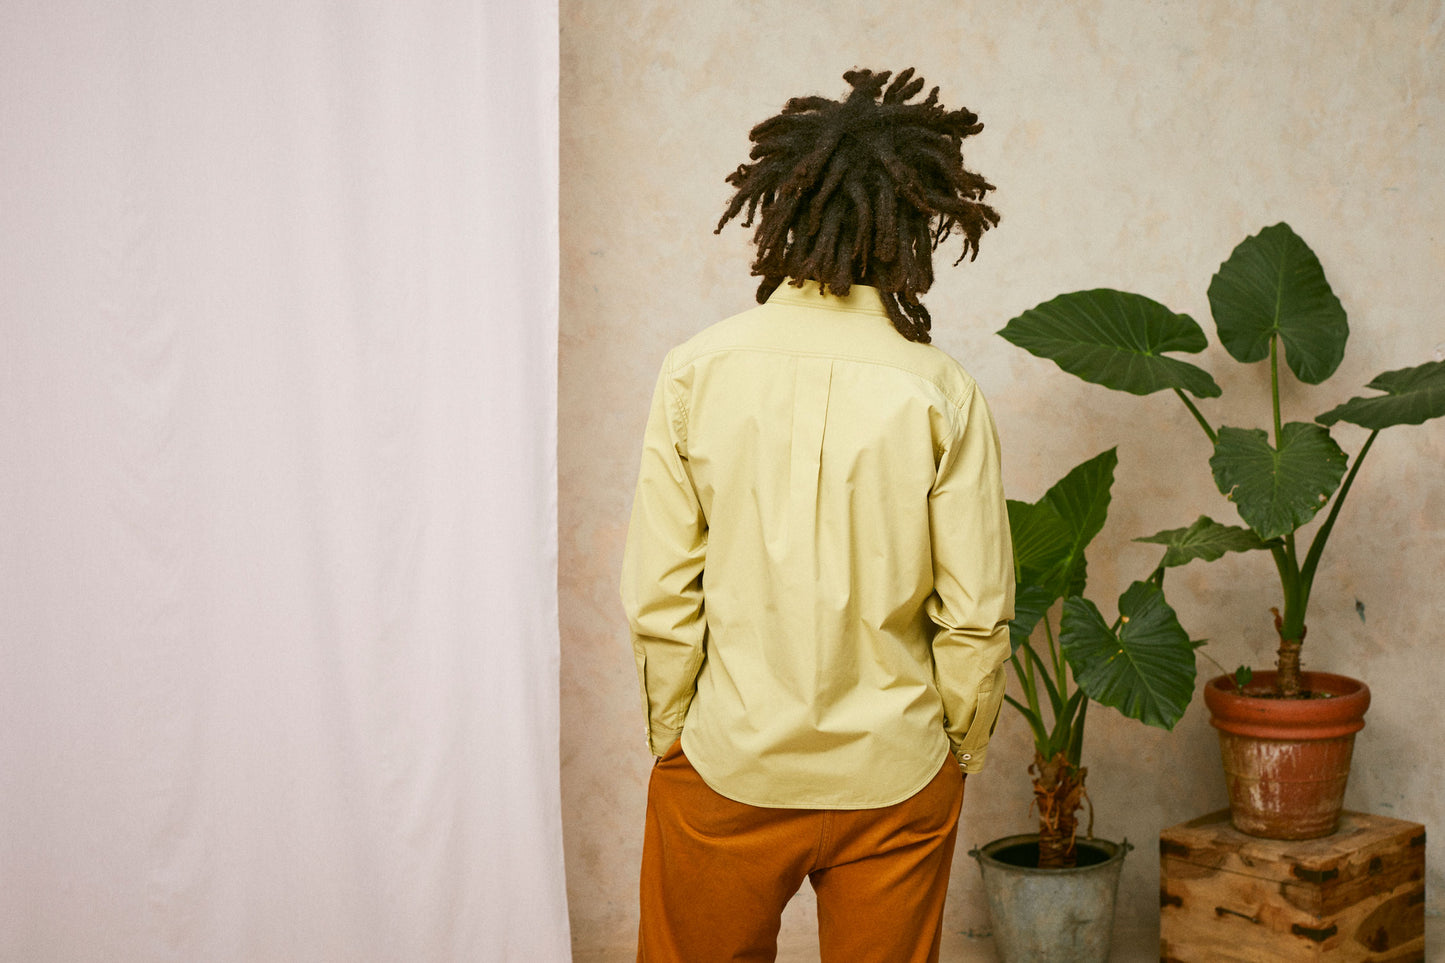 Close up back view of model wearing Saywood's Eddy Mens Khaki Shirt. Worn with tabacco trousers just visible. Model has both hands in his trouser pocket and a plant and drop of pink fabric can be seen in the background.